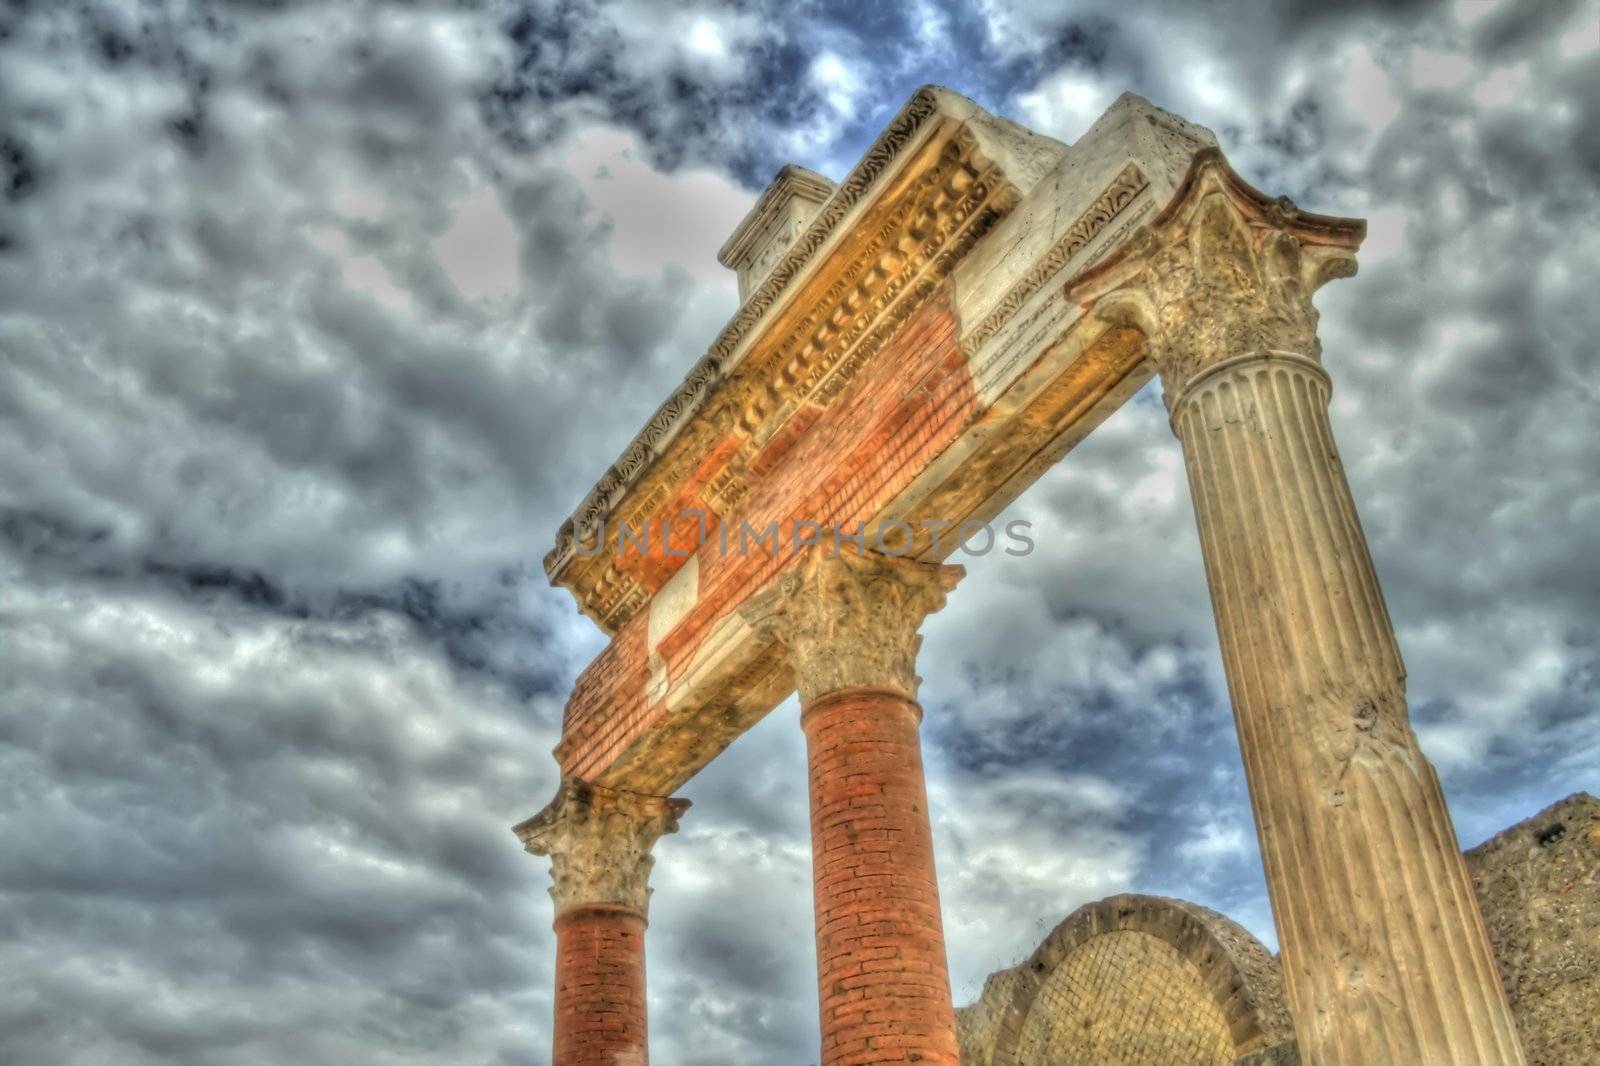 Painted Columns by jasony00